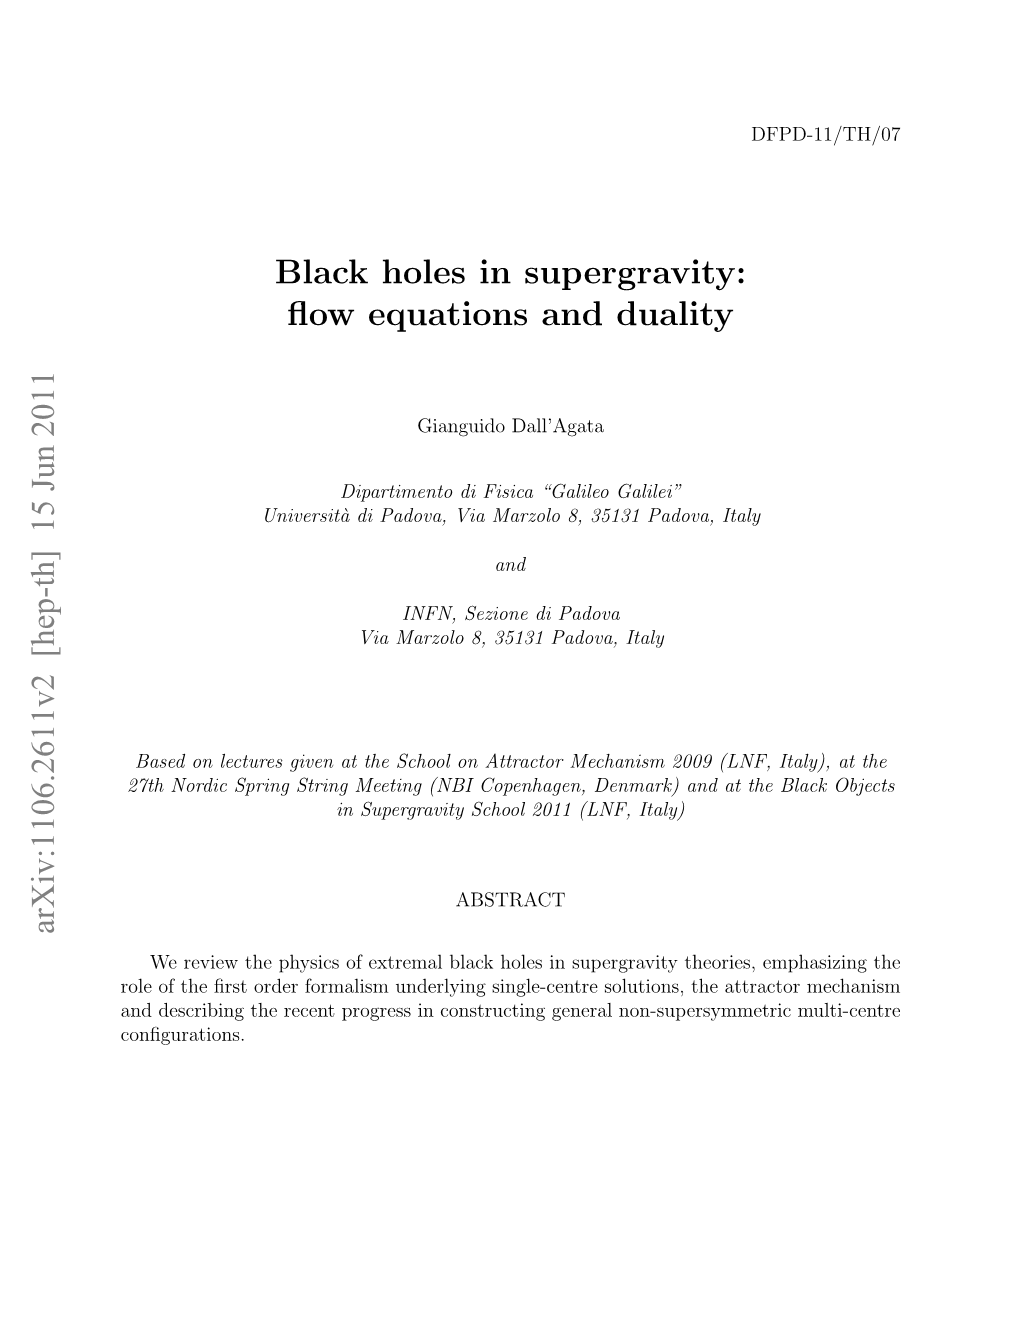 Black Holes in Supergravity: Flow Equations and Duality Arxiv:1106.2611V2 [Hep-Th] 15 Jun 2011